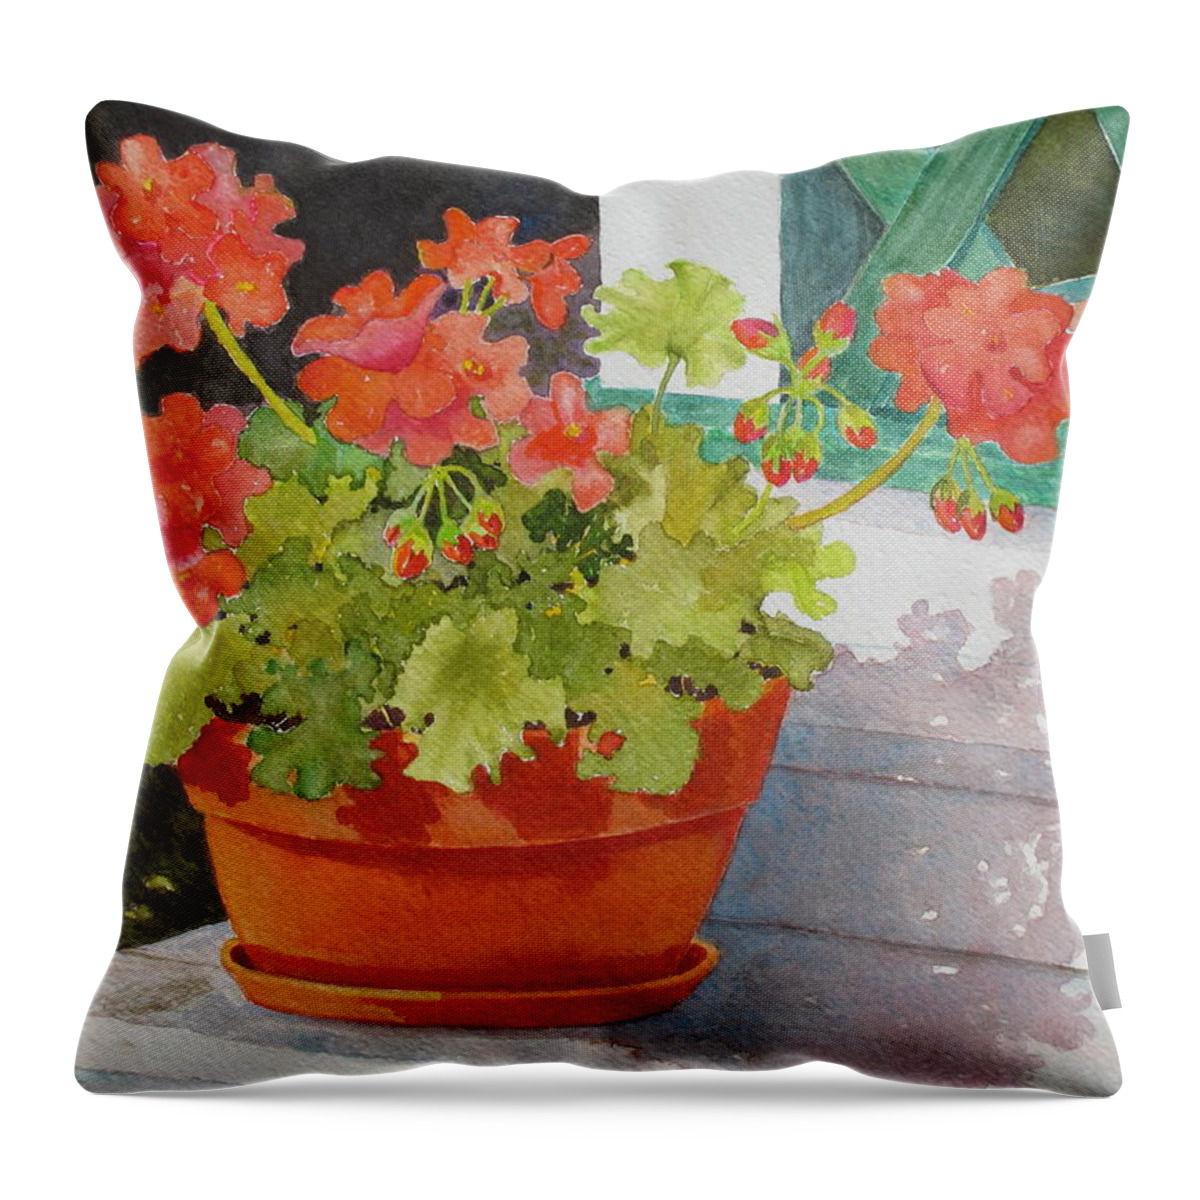 Flowers Throw Pillow featuring the painting Arbor Gallery Steps by Mary Ellen Mueller Legault